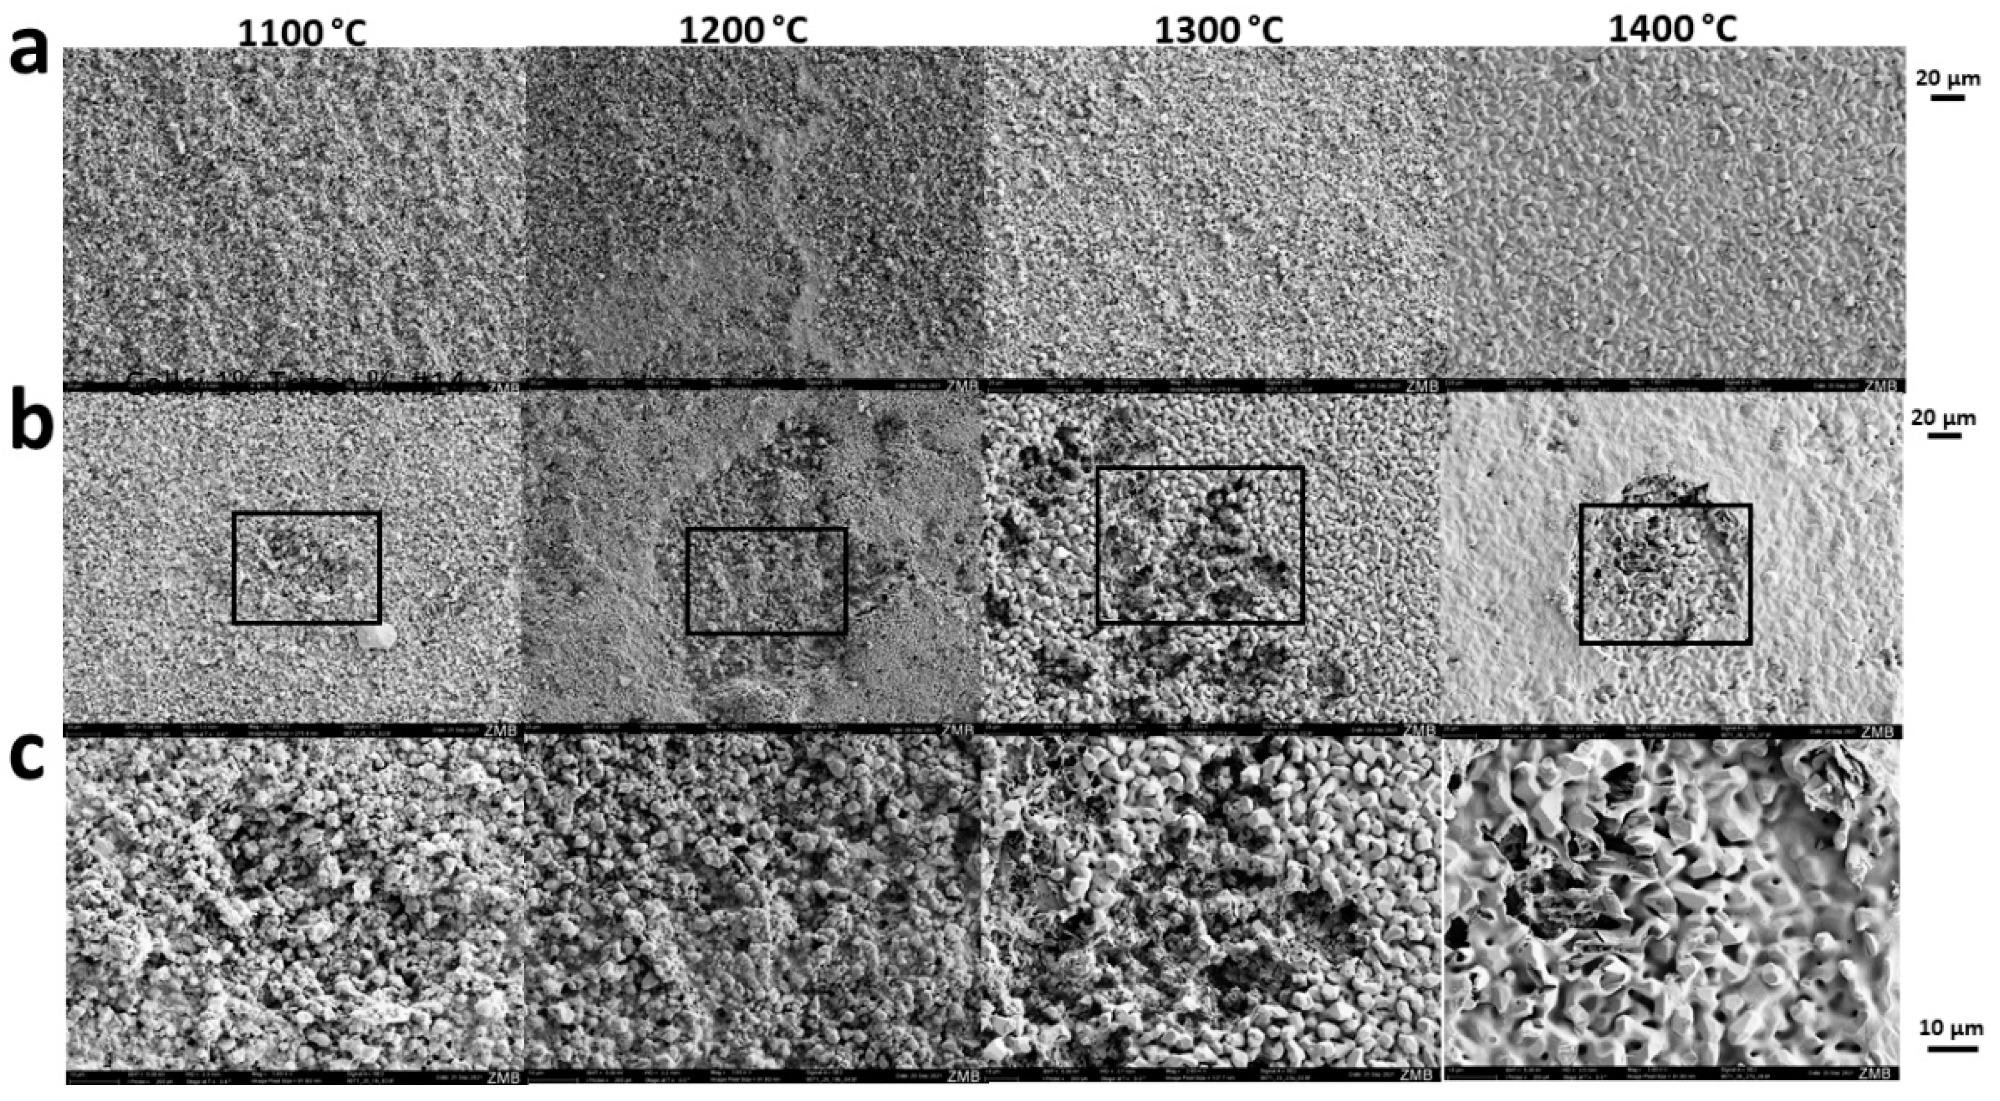 Sintering-temperature dependent osteoclastic degradation of scaffolds. Scanning electron microscopy was performed from scaffolds not exposed to cells (a) or seeded and exposed to osteoclastic RANKL-stimulated RAW264 cells (b,c). The maximal sintering temperature is provided at the top of each column. Scales of each panel are provided.